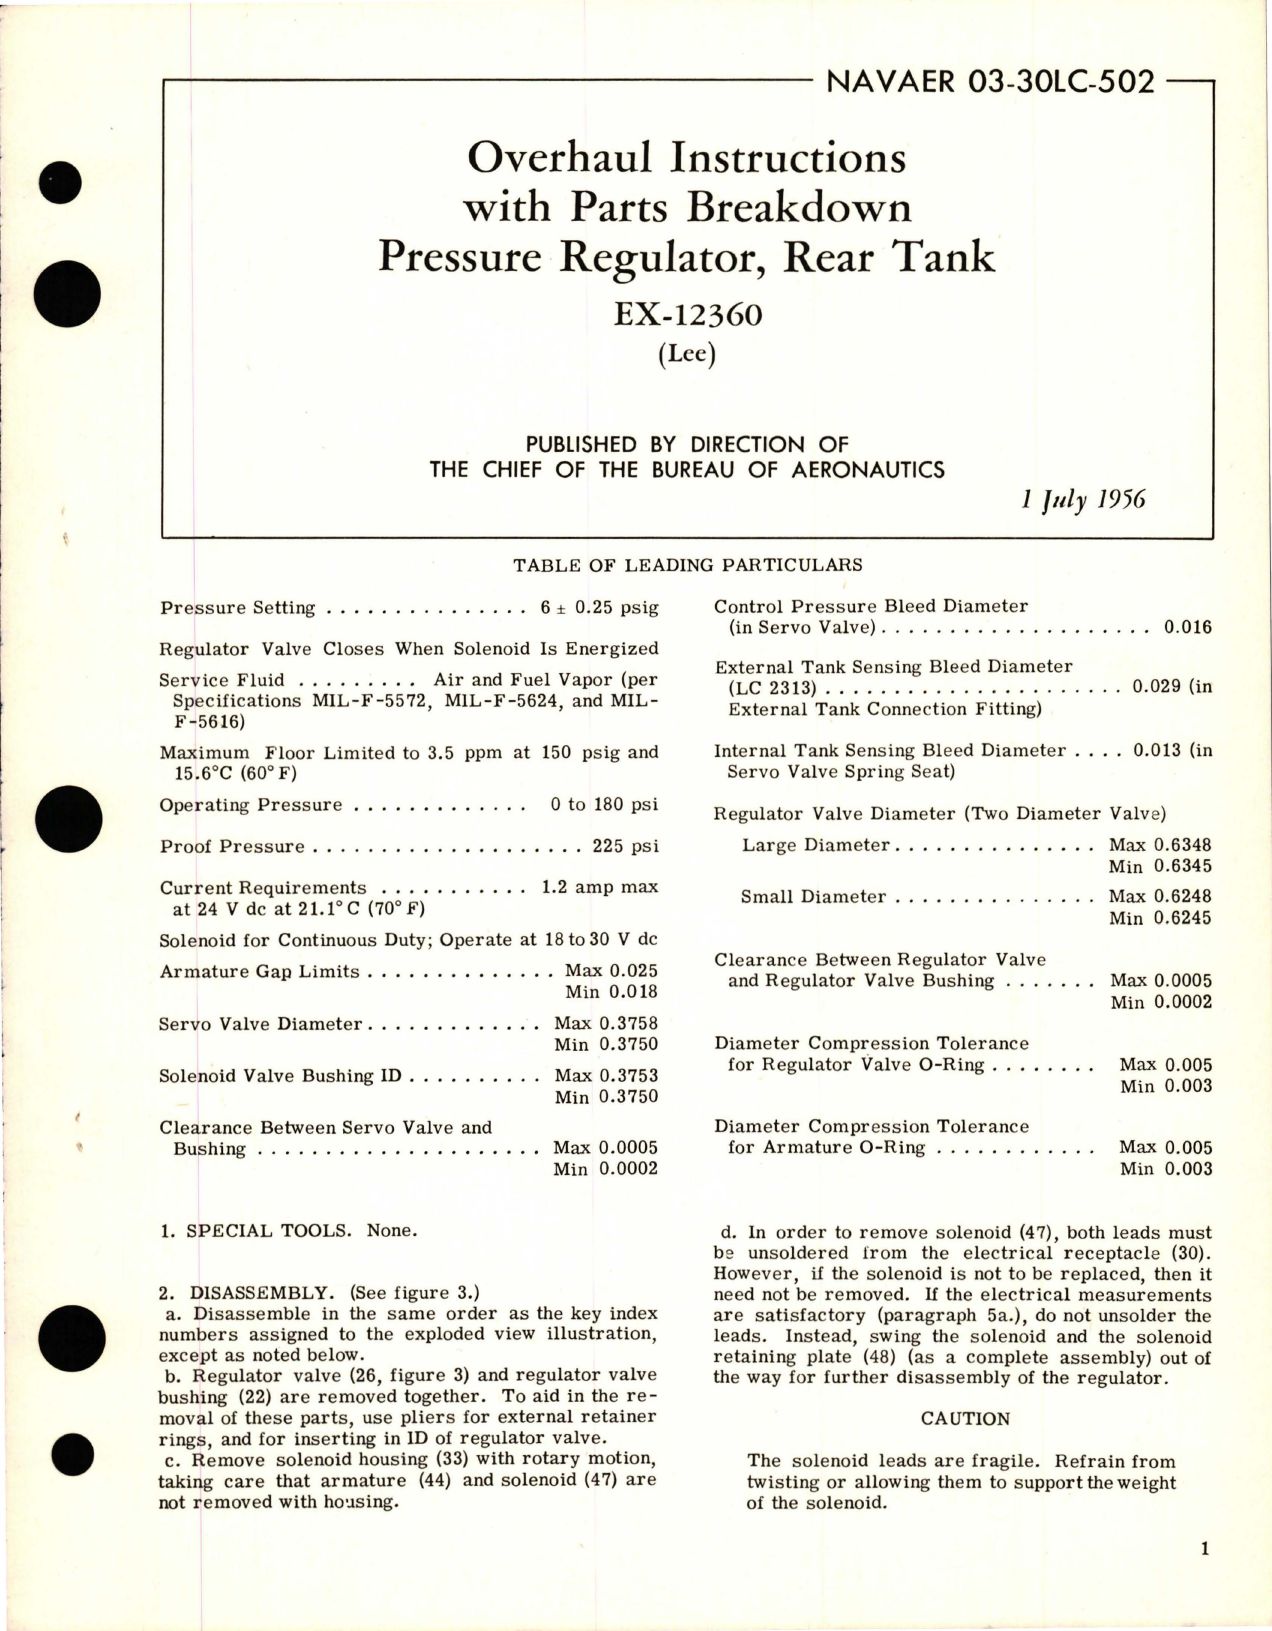 Sample page 1 from AirCorps Library document: Overhaul Instructions with Parts Breakdown for Rear Tank Pressure Regulator - EX-12360 